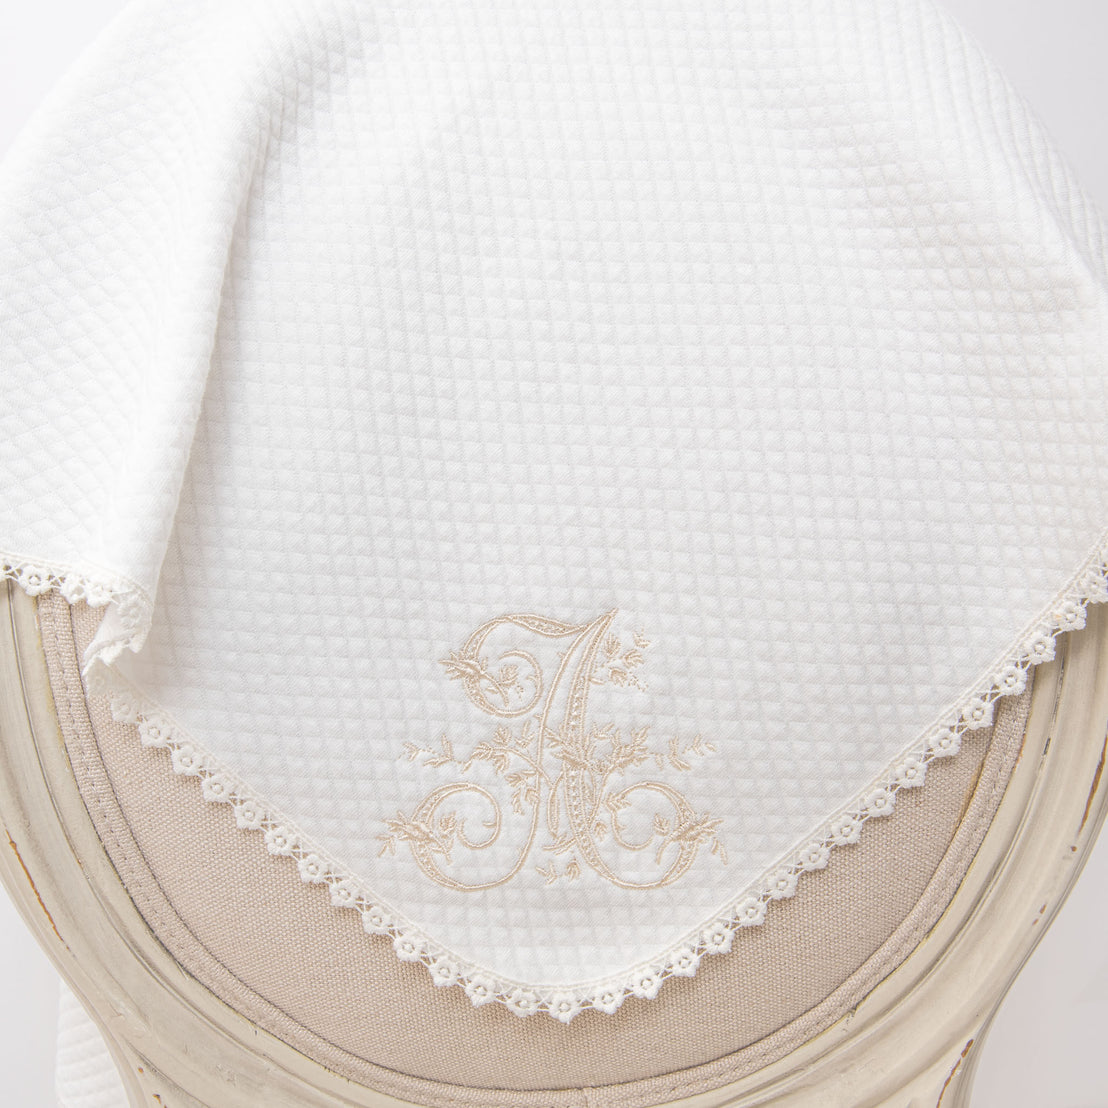 Elegant white baby blankets with initial embroidery personalization 'a' and delicate lace trim, draped over the edge of a soft beige cushioned chair.